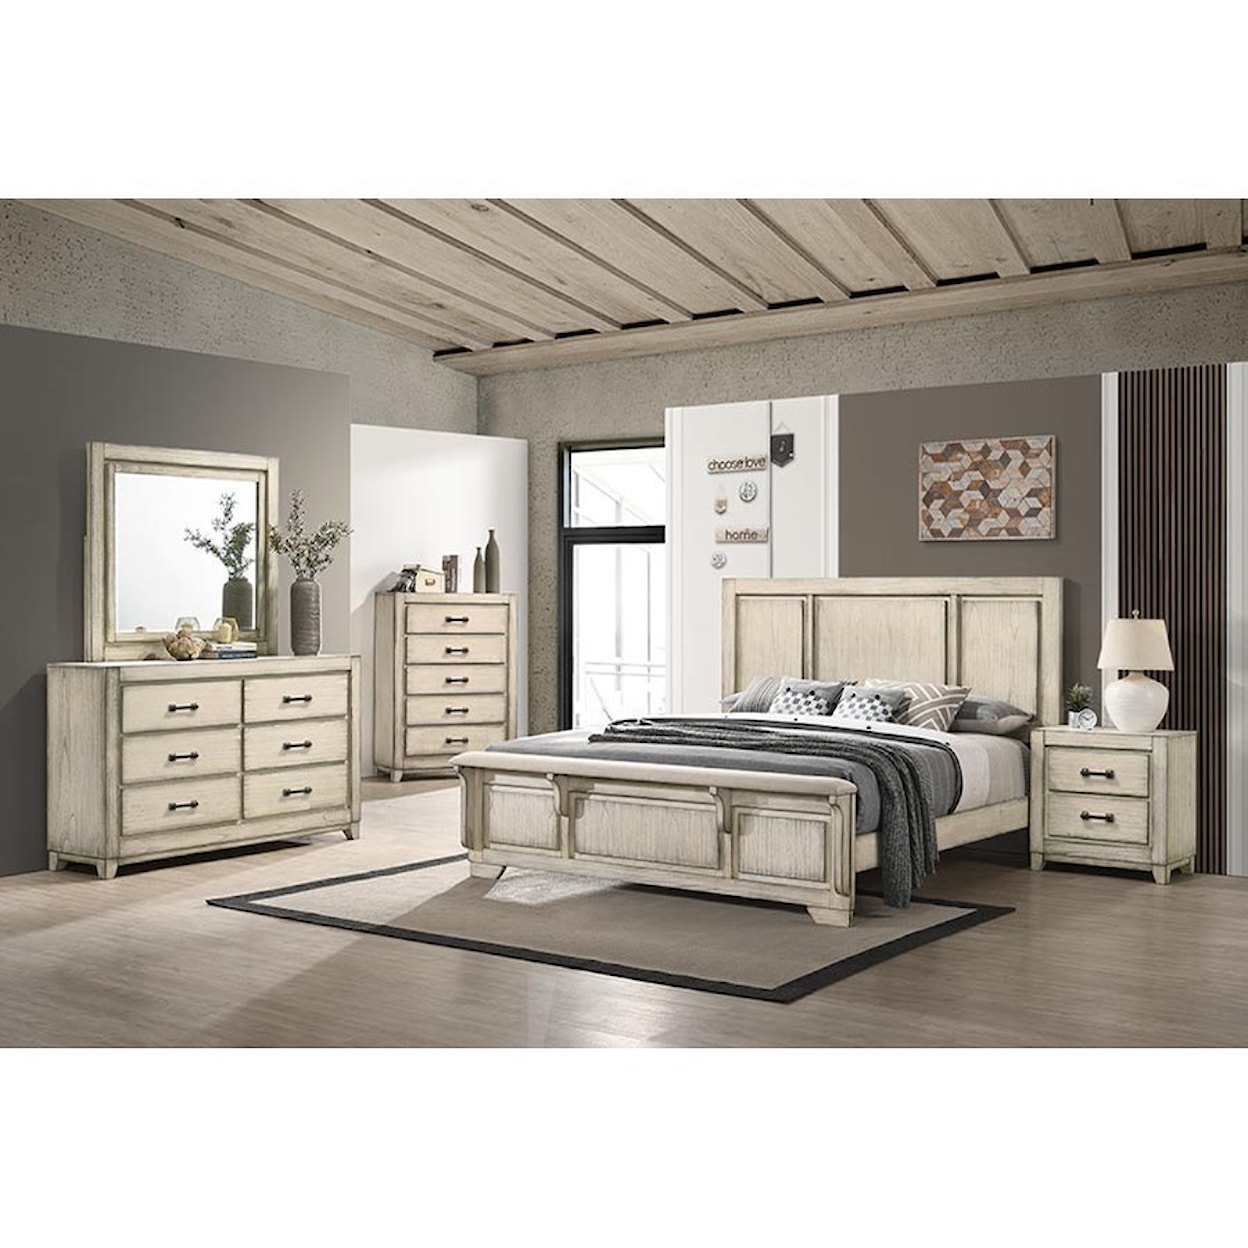 New Classic Furniture Ashland Twin Bedroom Group